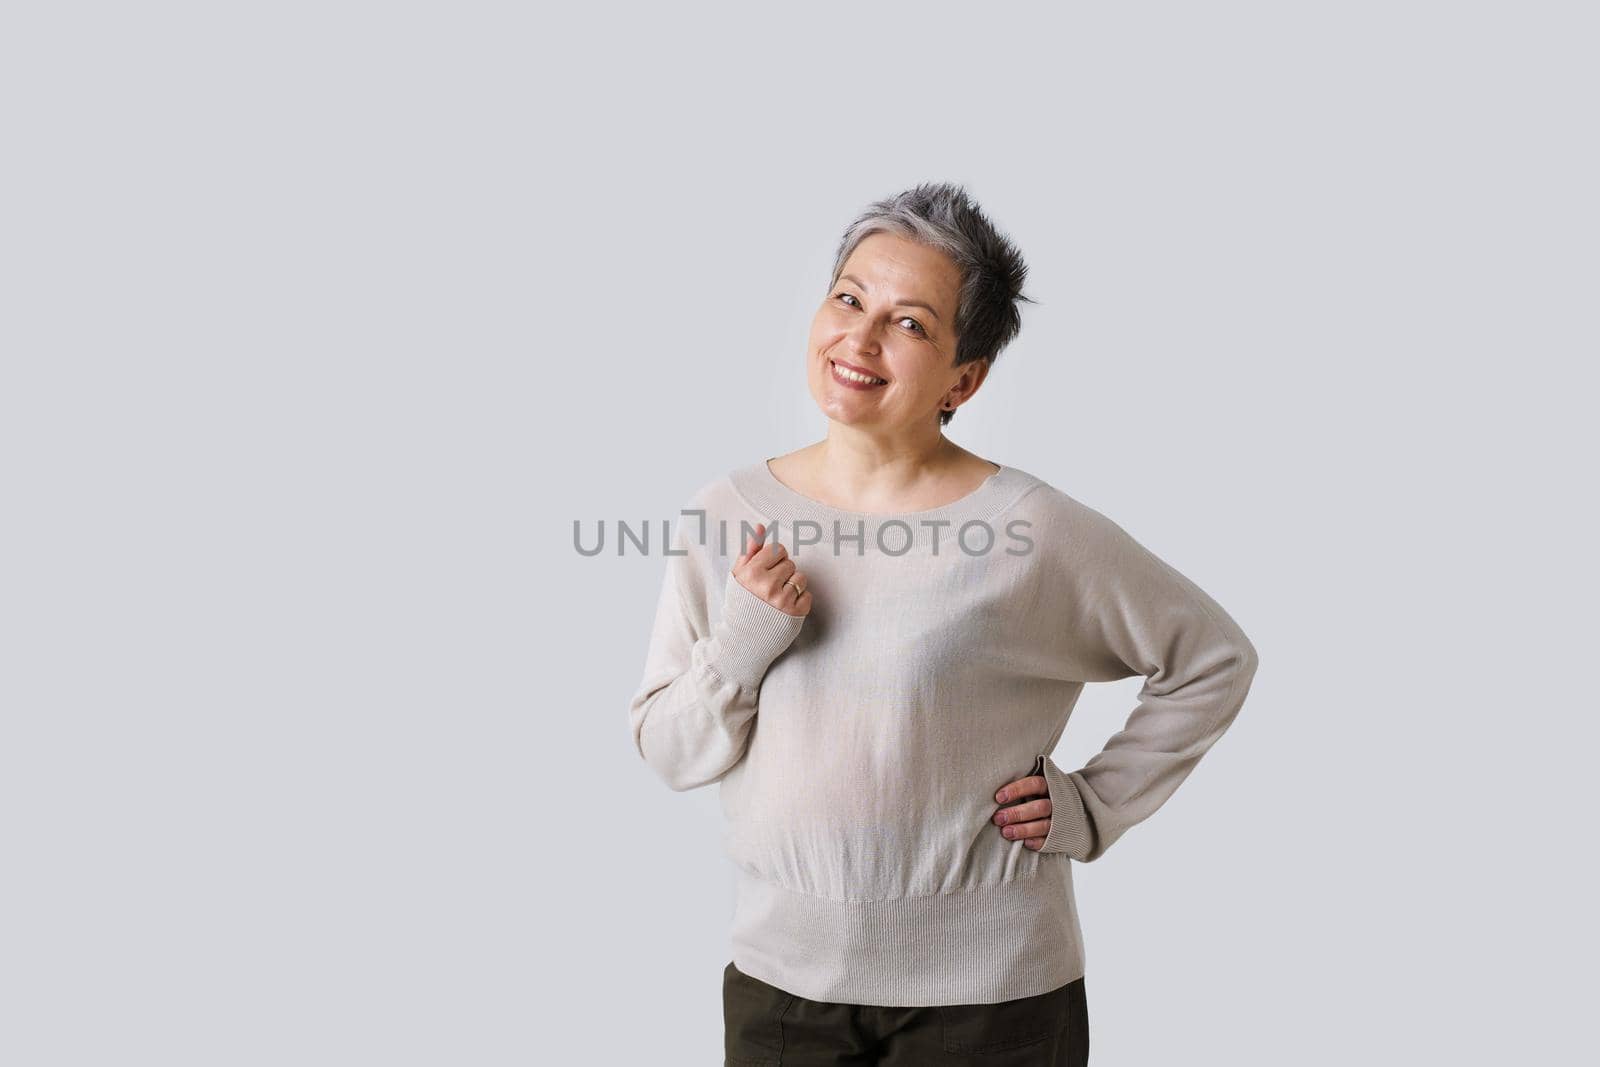 Tender mother look of mature woman with grey hair posing with hand up isolated on white background. Copy space and place for product placement. Toned image. Aged beauty concept.